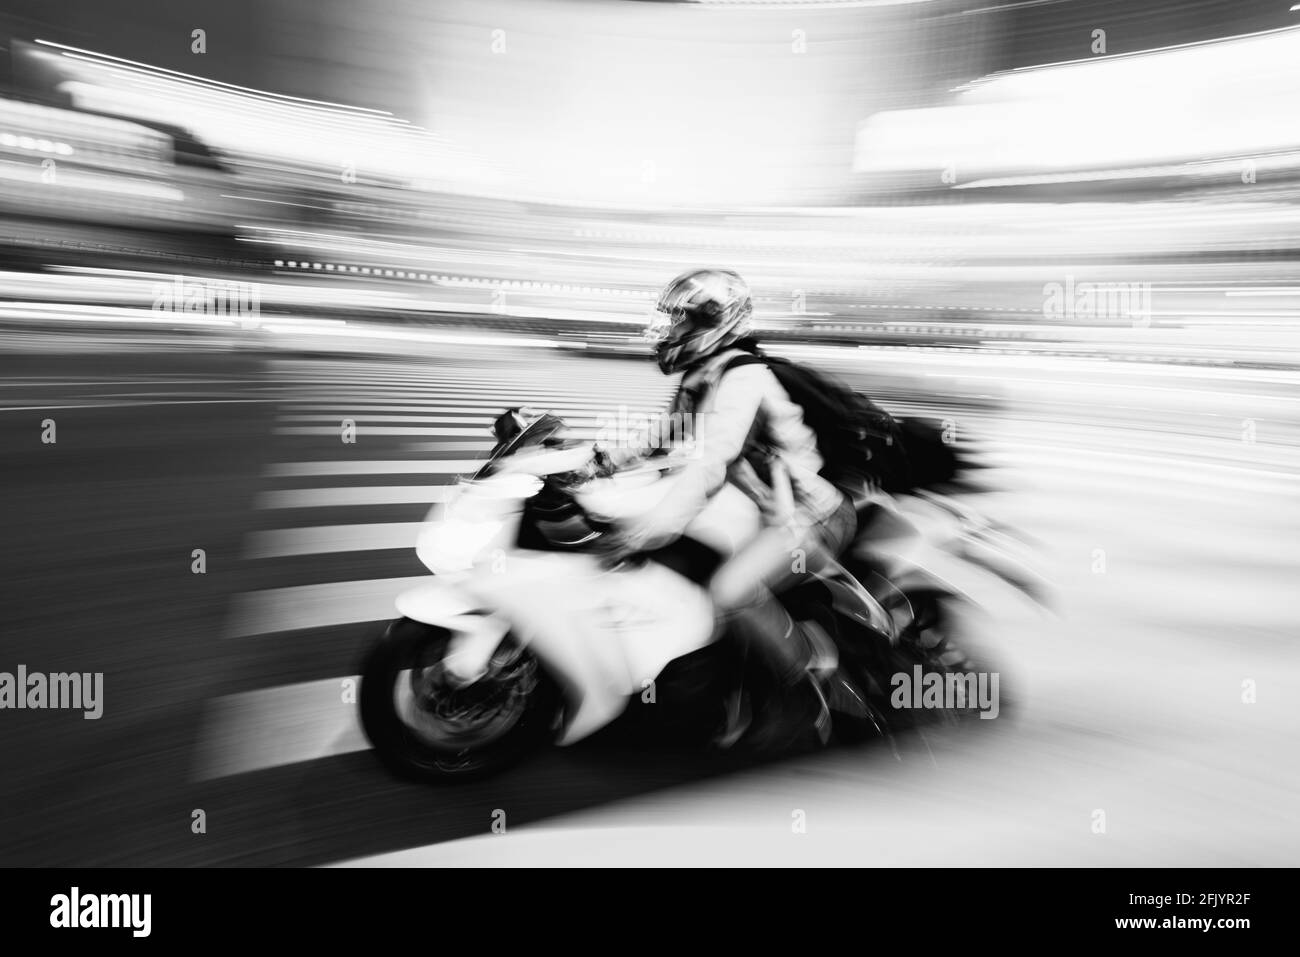 Tokyo, Japan - December 11, 2015: Motion Blur. Scooter on Night City Road. Abstrasct Blur Background of Night Cityspace Stock Photo